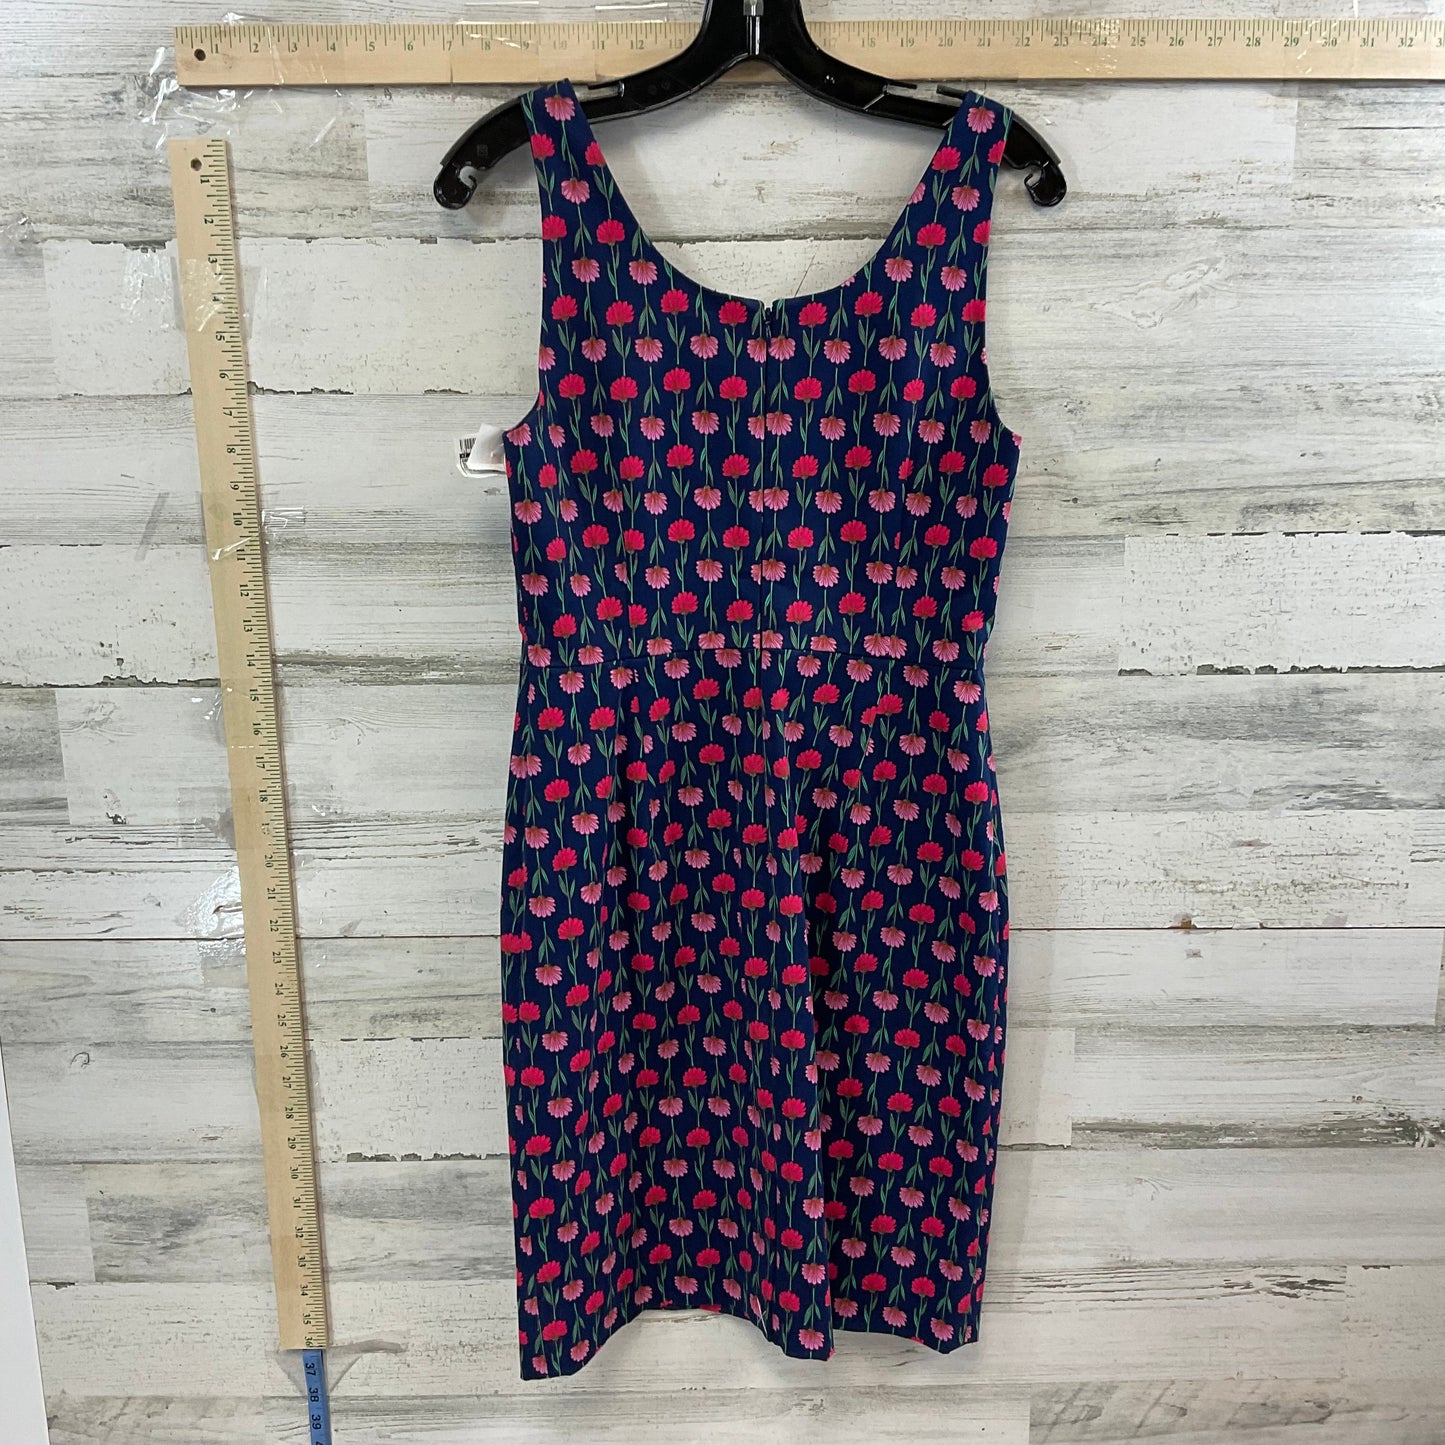 Blue & Red Dress Casual Short J. Crew, Size Xs